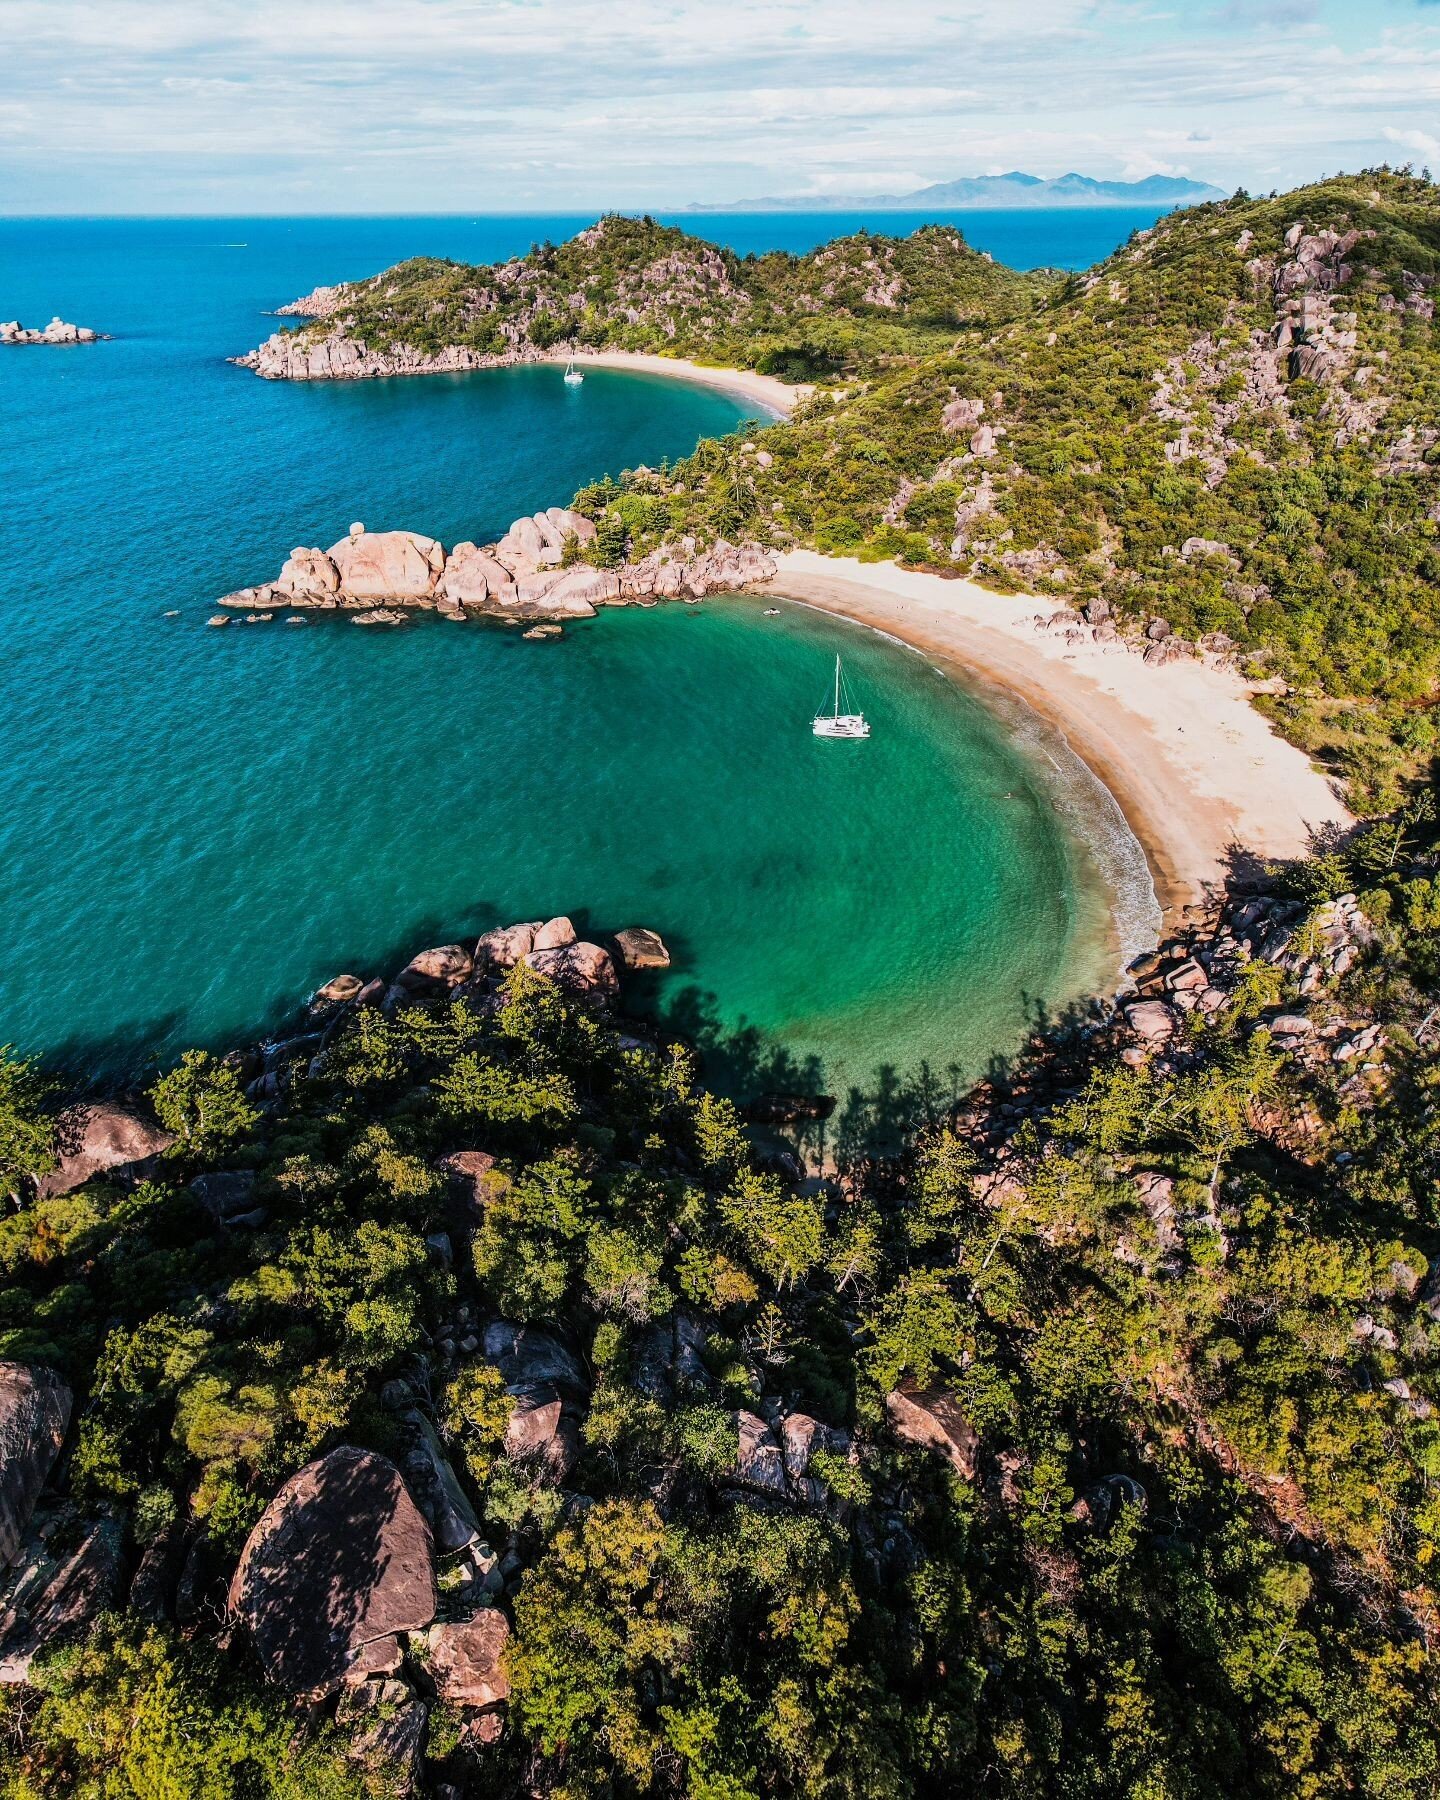 A little piece of paradise ☀️⁠
⁠
If we had three words to describe Balding Bay and Radical Bay, they would be - secluded, spectacular, special ✨ ⁠
⁠
Photo via @ben.koehler_⁠
⁠
#thisismagneticisland #upforunexpected #magneticisland #townsvillenorthque